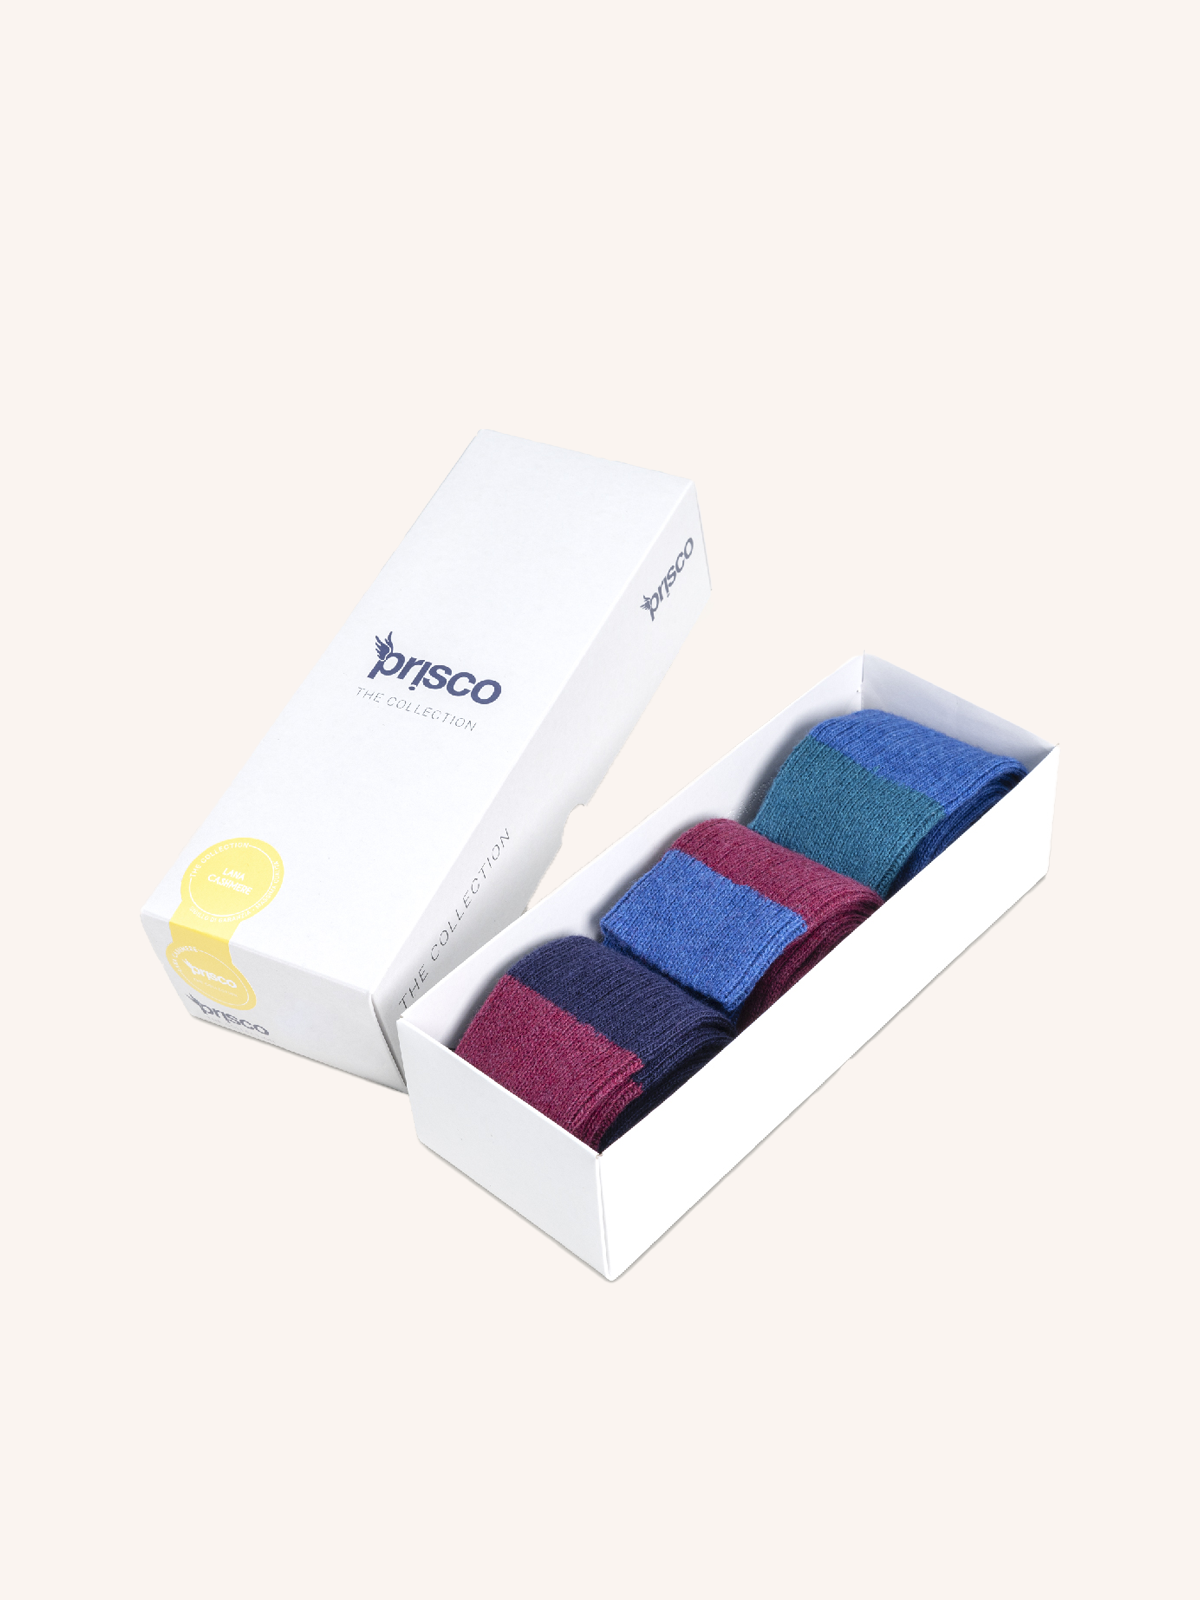 Short Cashmere Sock for Men | Plain Color | Pack of 3 Pairs | Cachelife UC